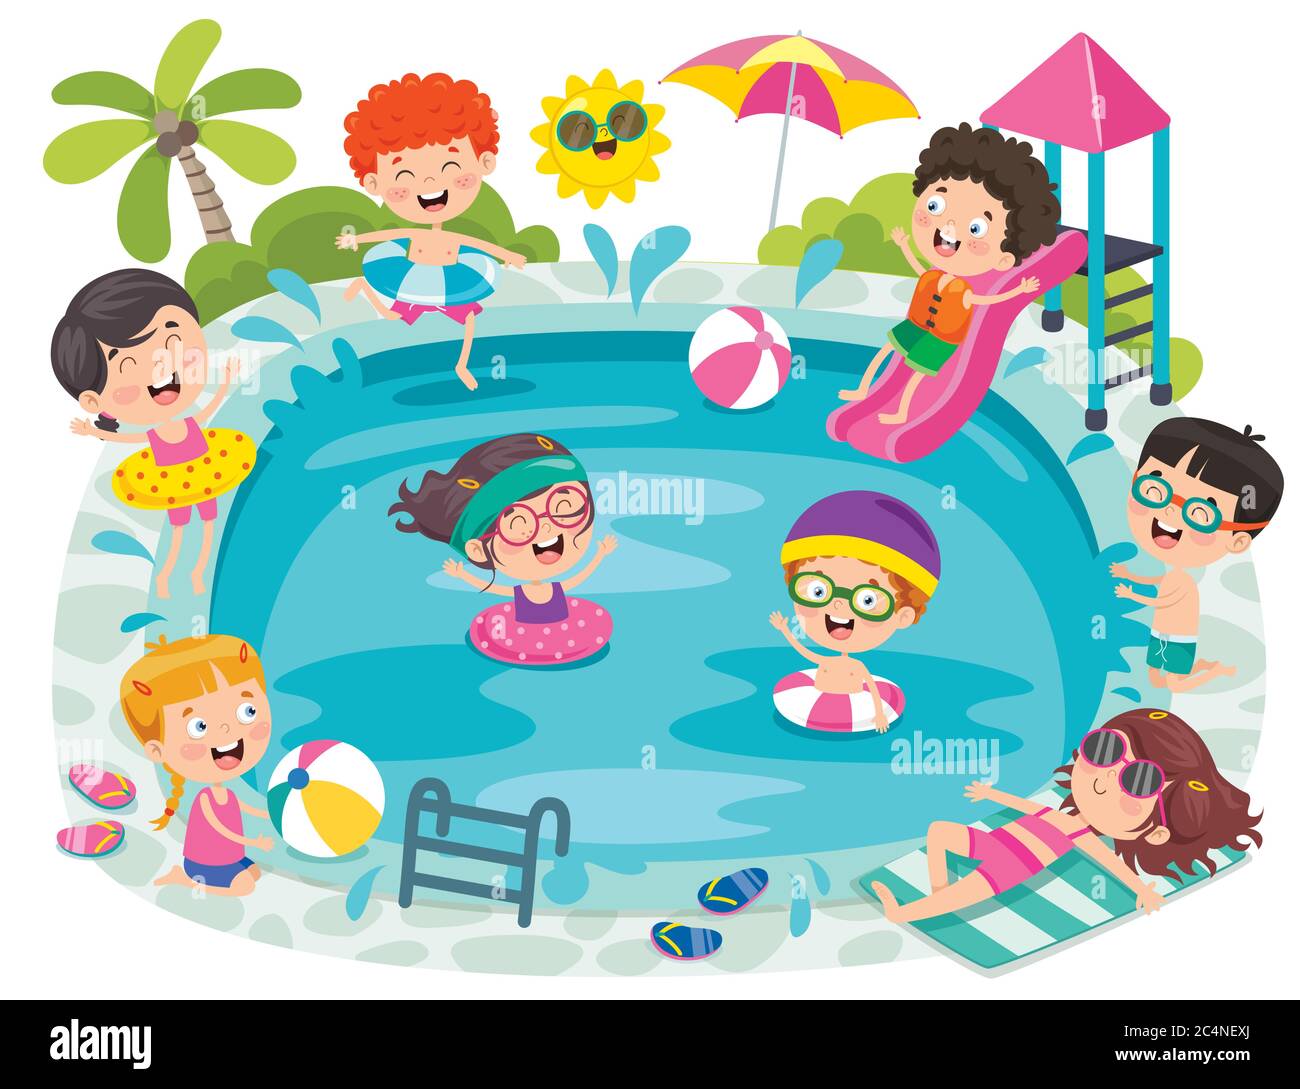 Kids pools Cut Out Stock Images & Pictures - Alamy